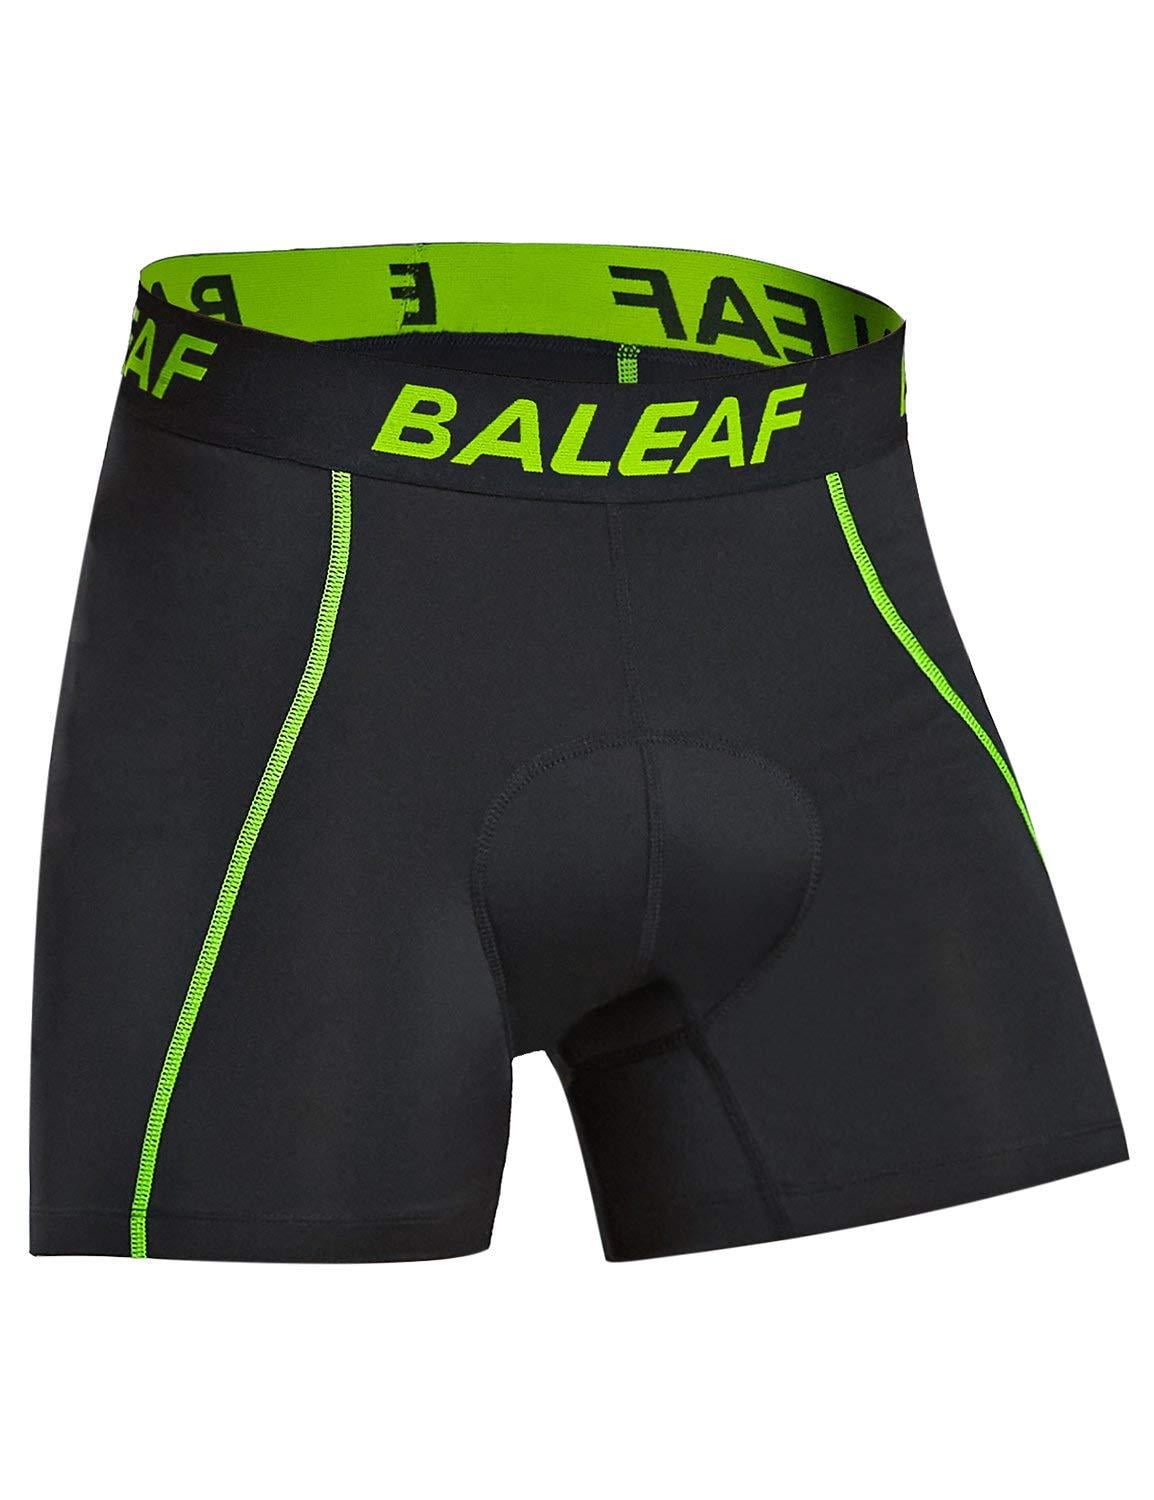 Baleaf Mens 3d Padded Bike Bicycle MTB Cycling Underwear Shorts Blue M for sale online